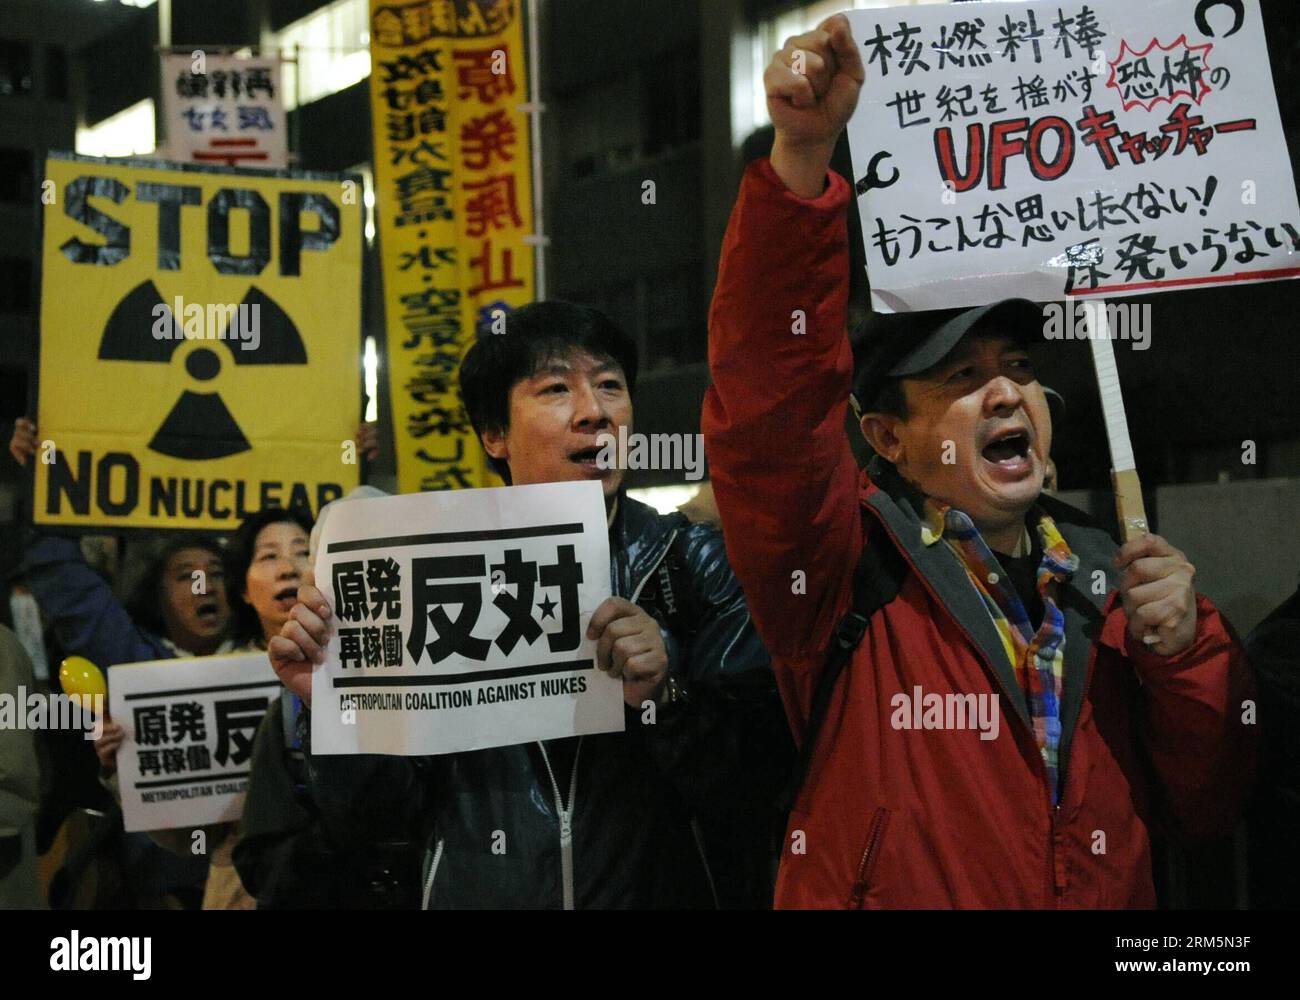 Bildnummer: 60689811  Datum: 08.11.2013  Copyright: imago/Xinhua (131108) -- TOKYO, Nov. 8, 2013 (Xinhua) -- Demonstrators holding placards shout slogans during an anti-nuke demonstration in front of the Prime Minister s official residence in Tokyo, Japan, Nov. 8, 2013. (Xinhua/Stringer)(hy) JAPAN-TOKYO-ANTI-NUKE-DEMONSTRATION PUBLICATIONxNOTxINxCHN Atomwaffen Gegner Protest Atombombe xns x0x 2013 quer premiumd      60689811 Date 08 11 2013 Copyright Imago XINHUA  Tokyo Nov 8 2013 XINHUA demonstrator Holding placards Shout Slogans during to Anti nuke Demonstration in Front of The Prime Ministe Stock Photo